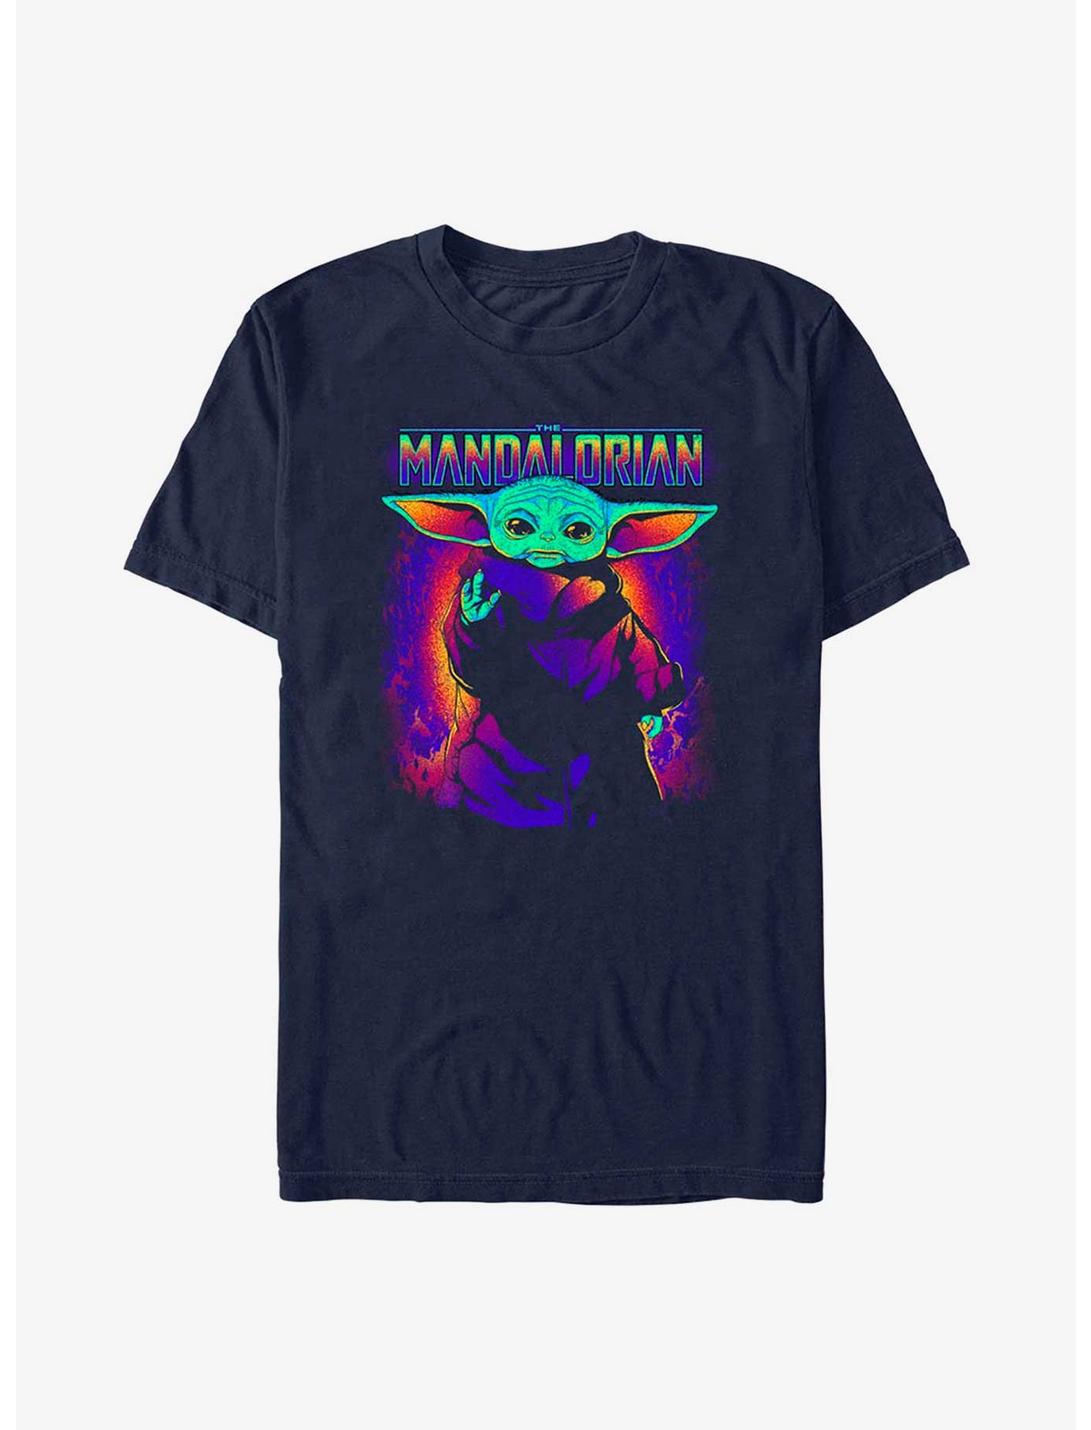 Star Wars The Mandalorian Neon Primary The Child T-Shirt, NAVY, hi-res